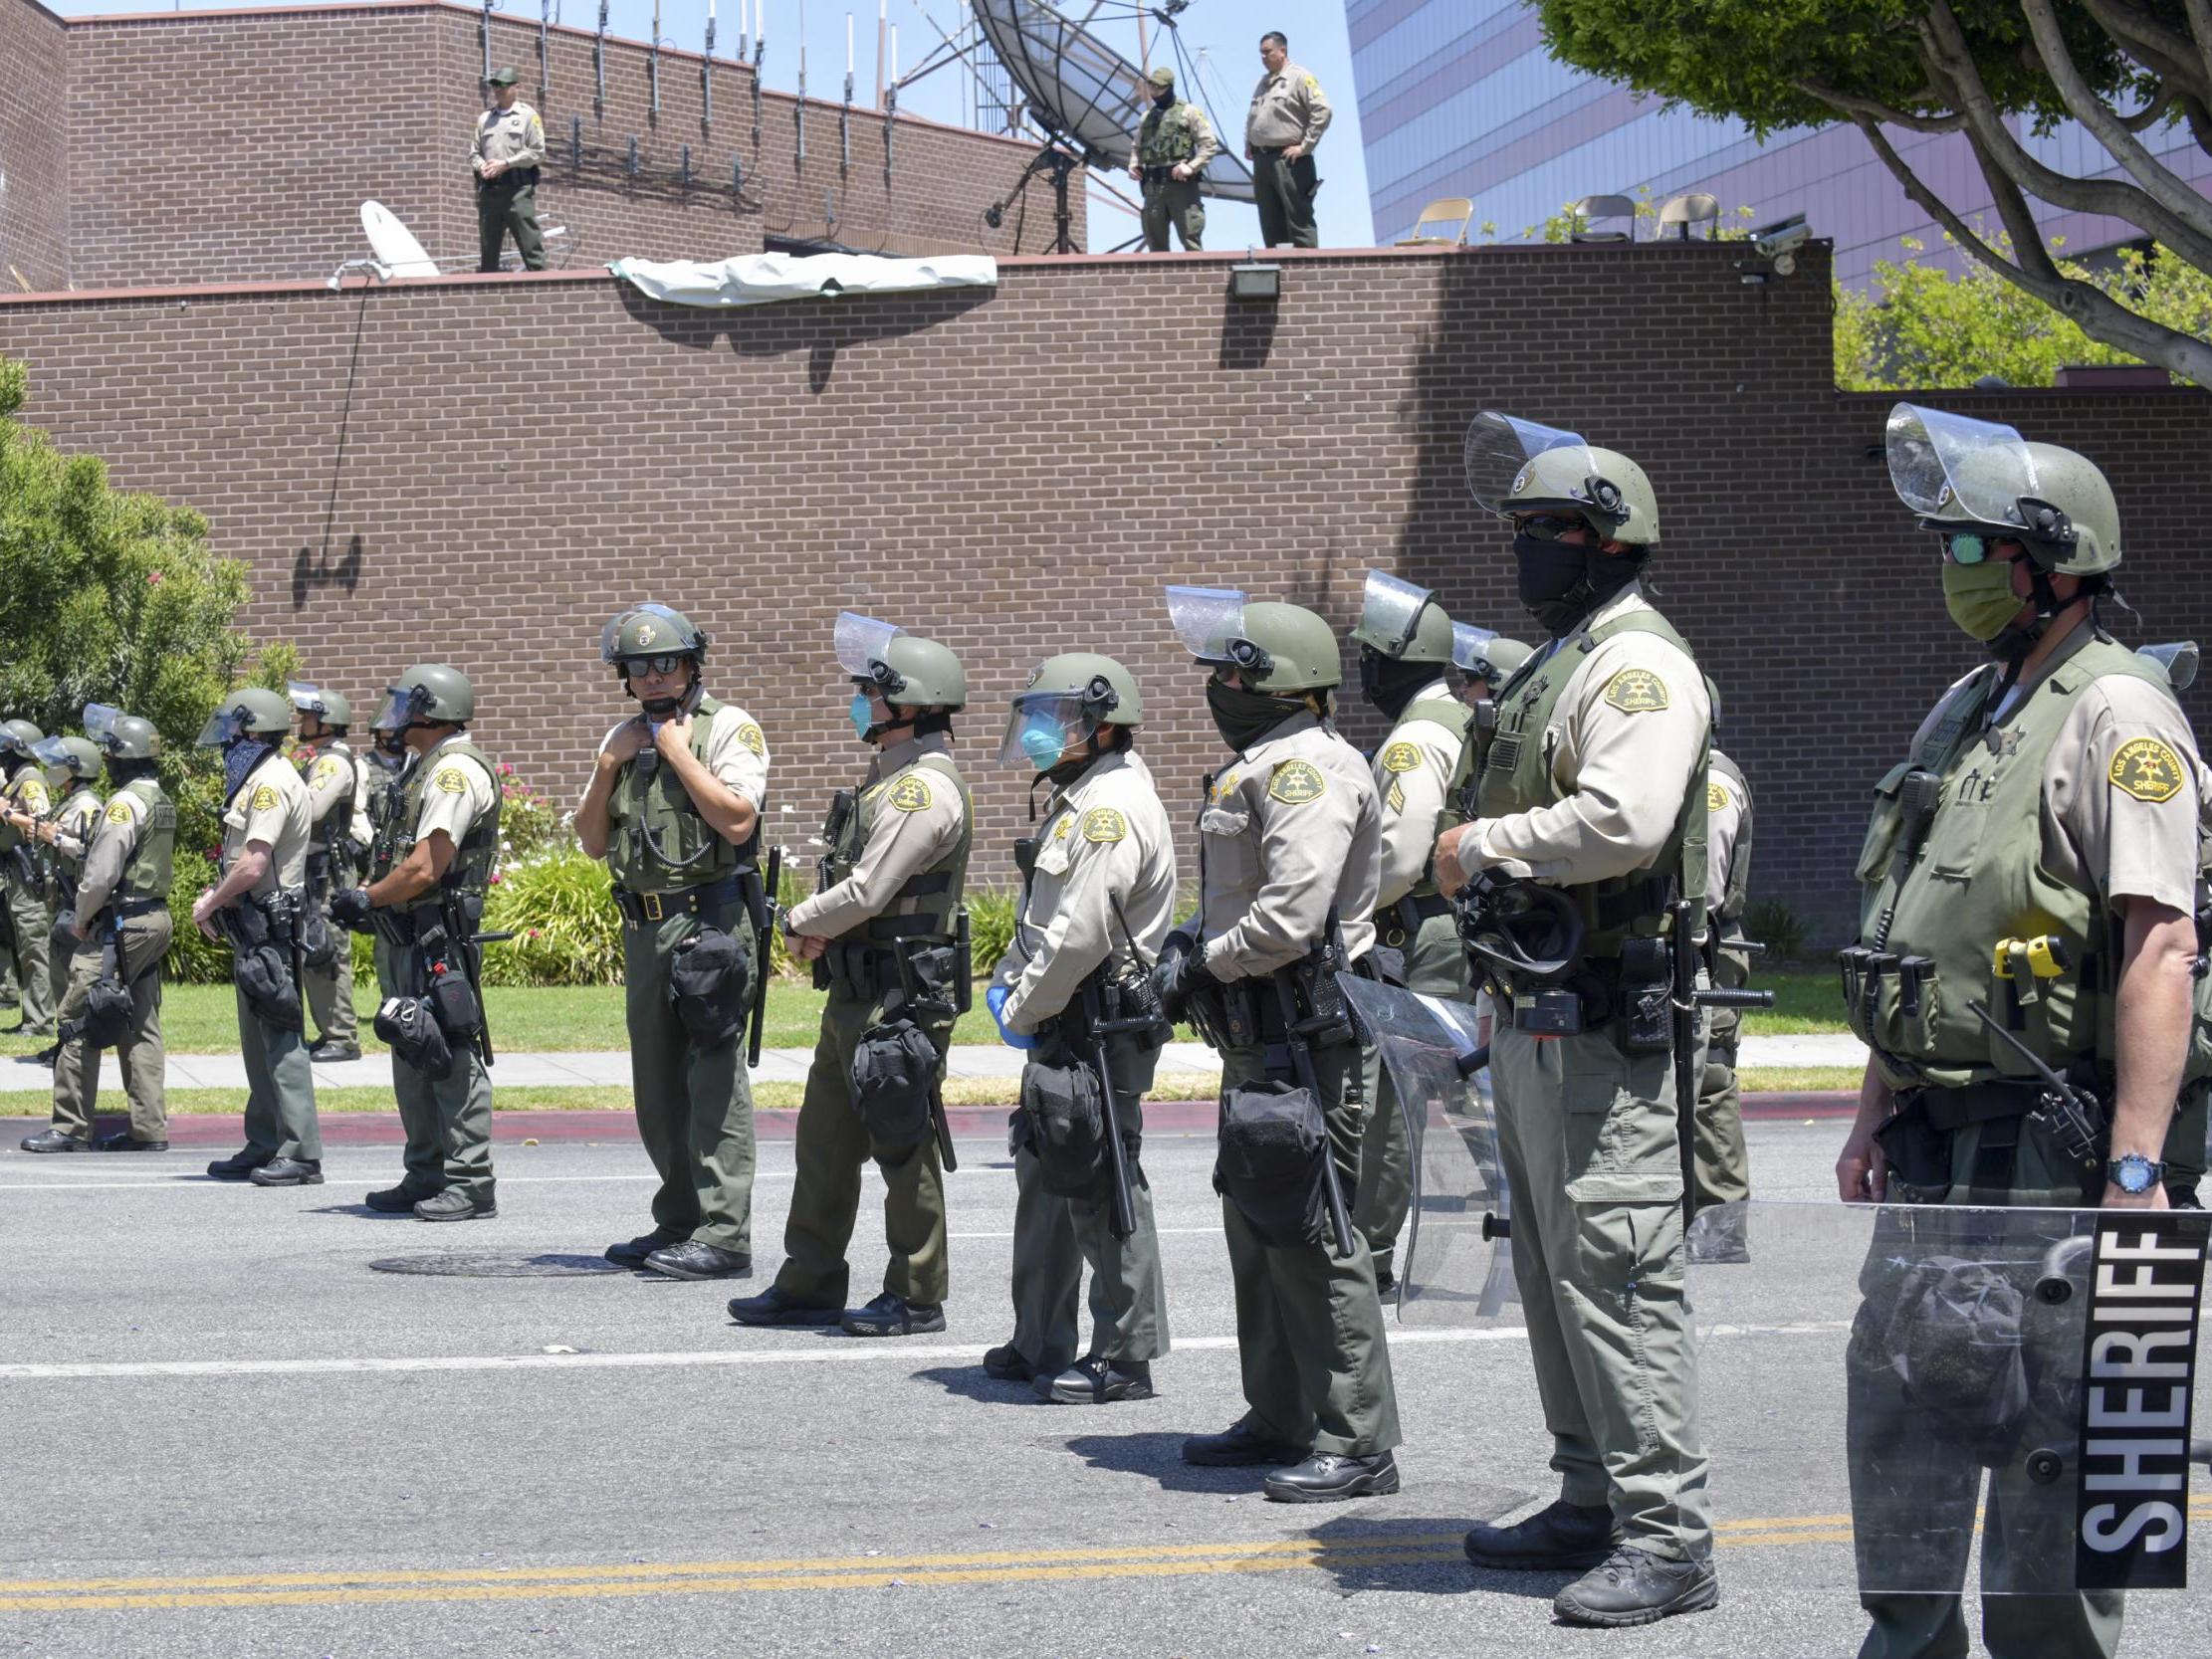 The origin of the US police force could explain why it’s so dysfunctional